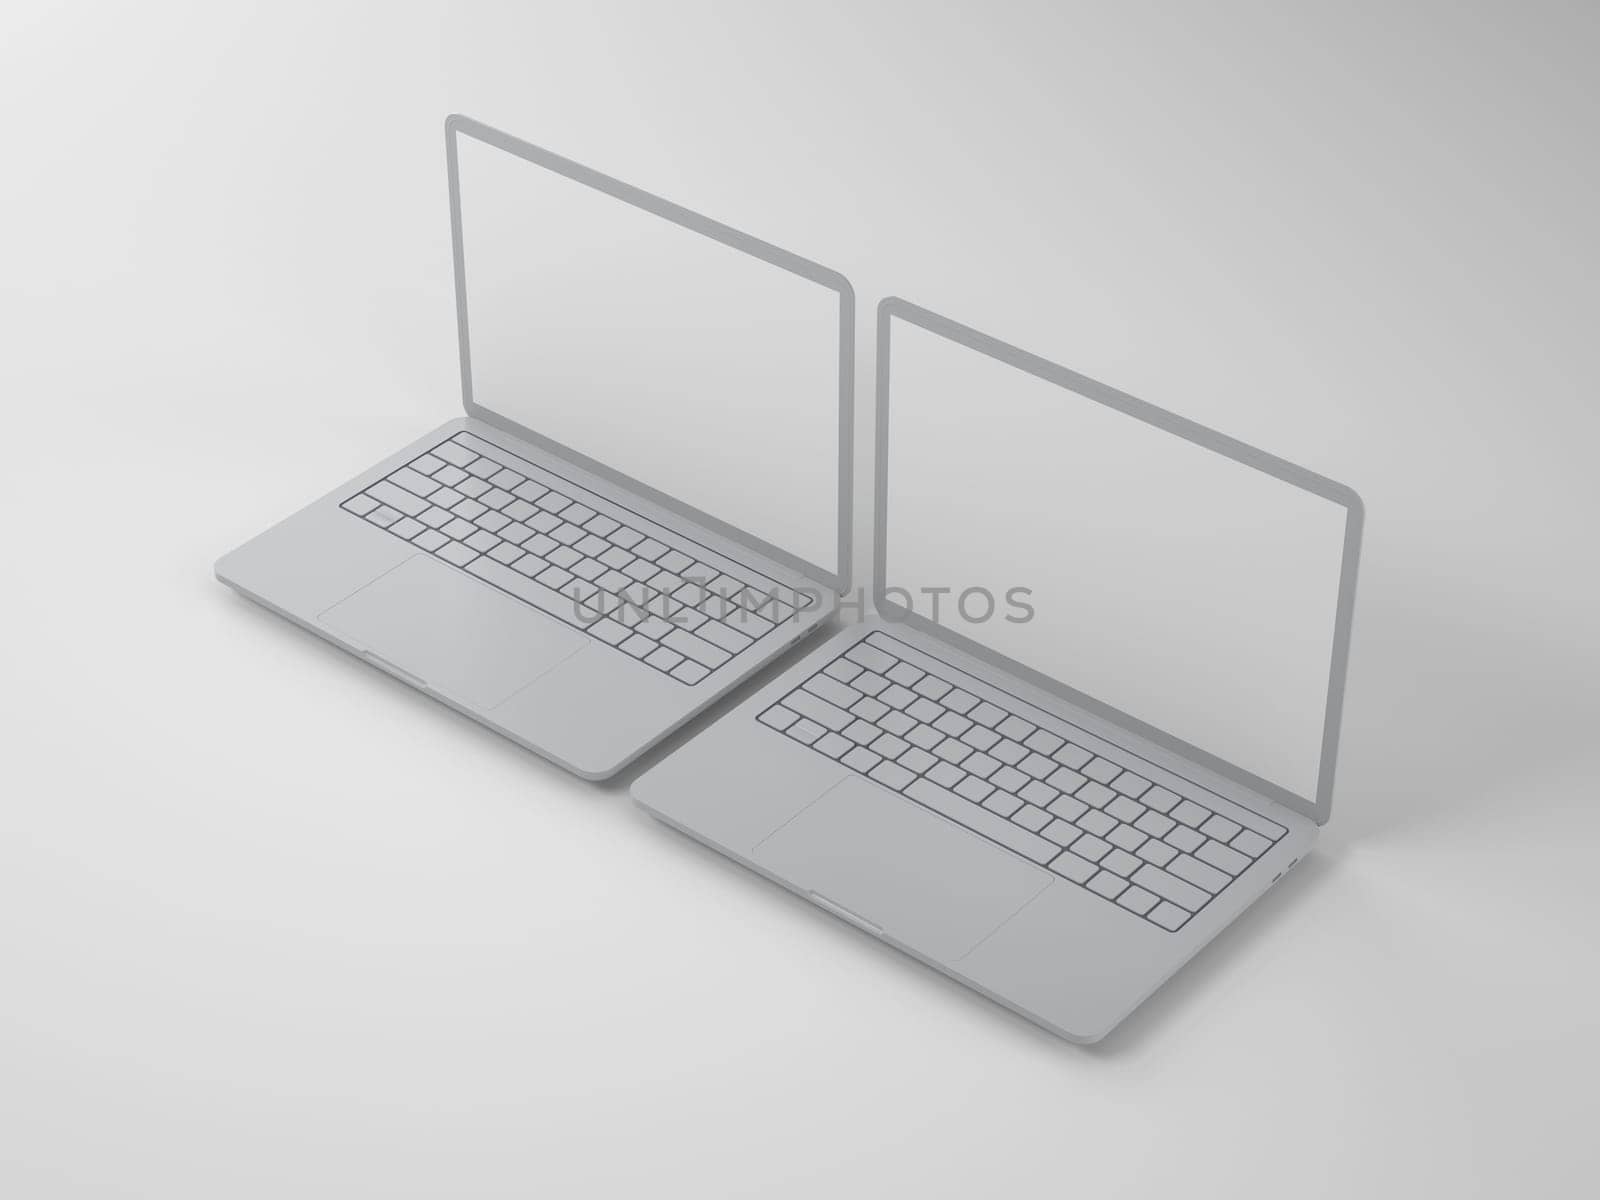 Two open modern gray laptops with blank screens on a light background